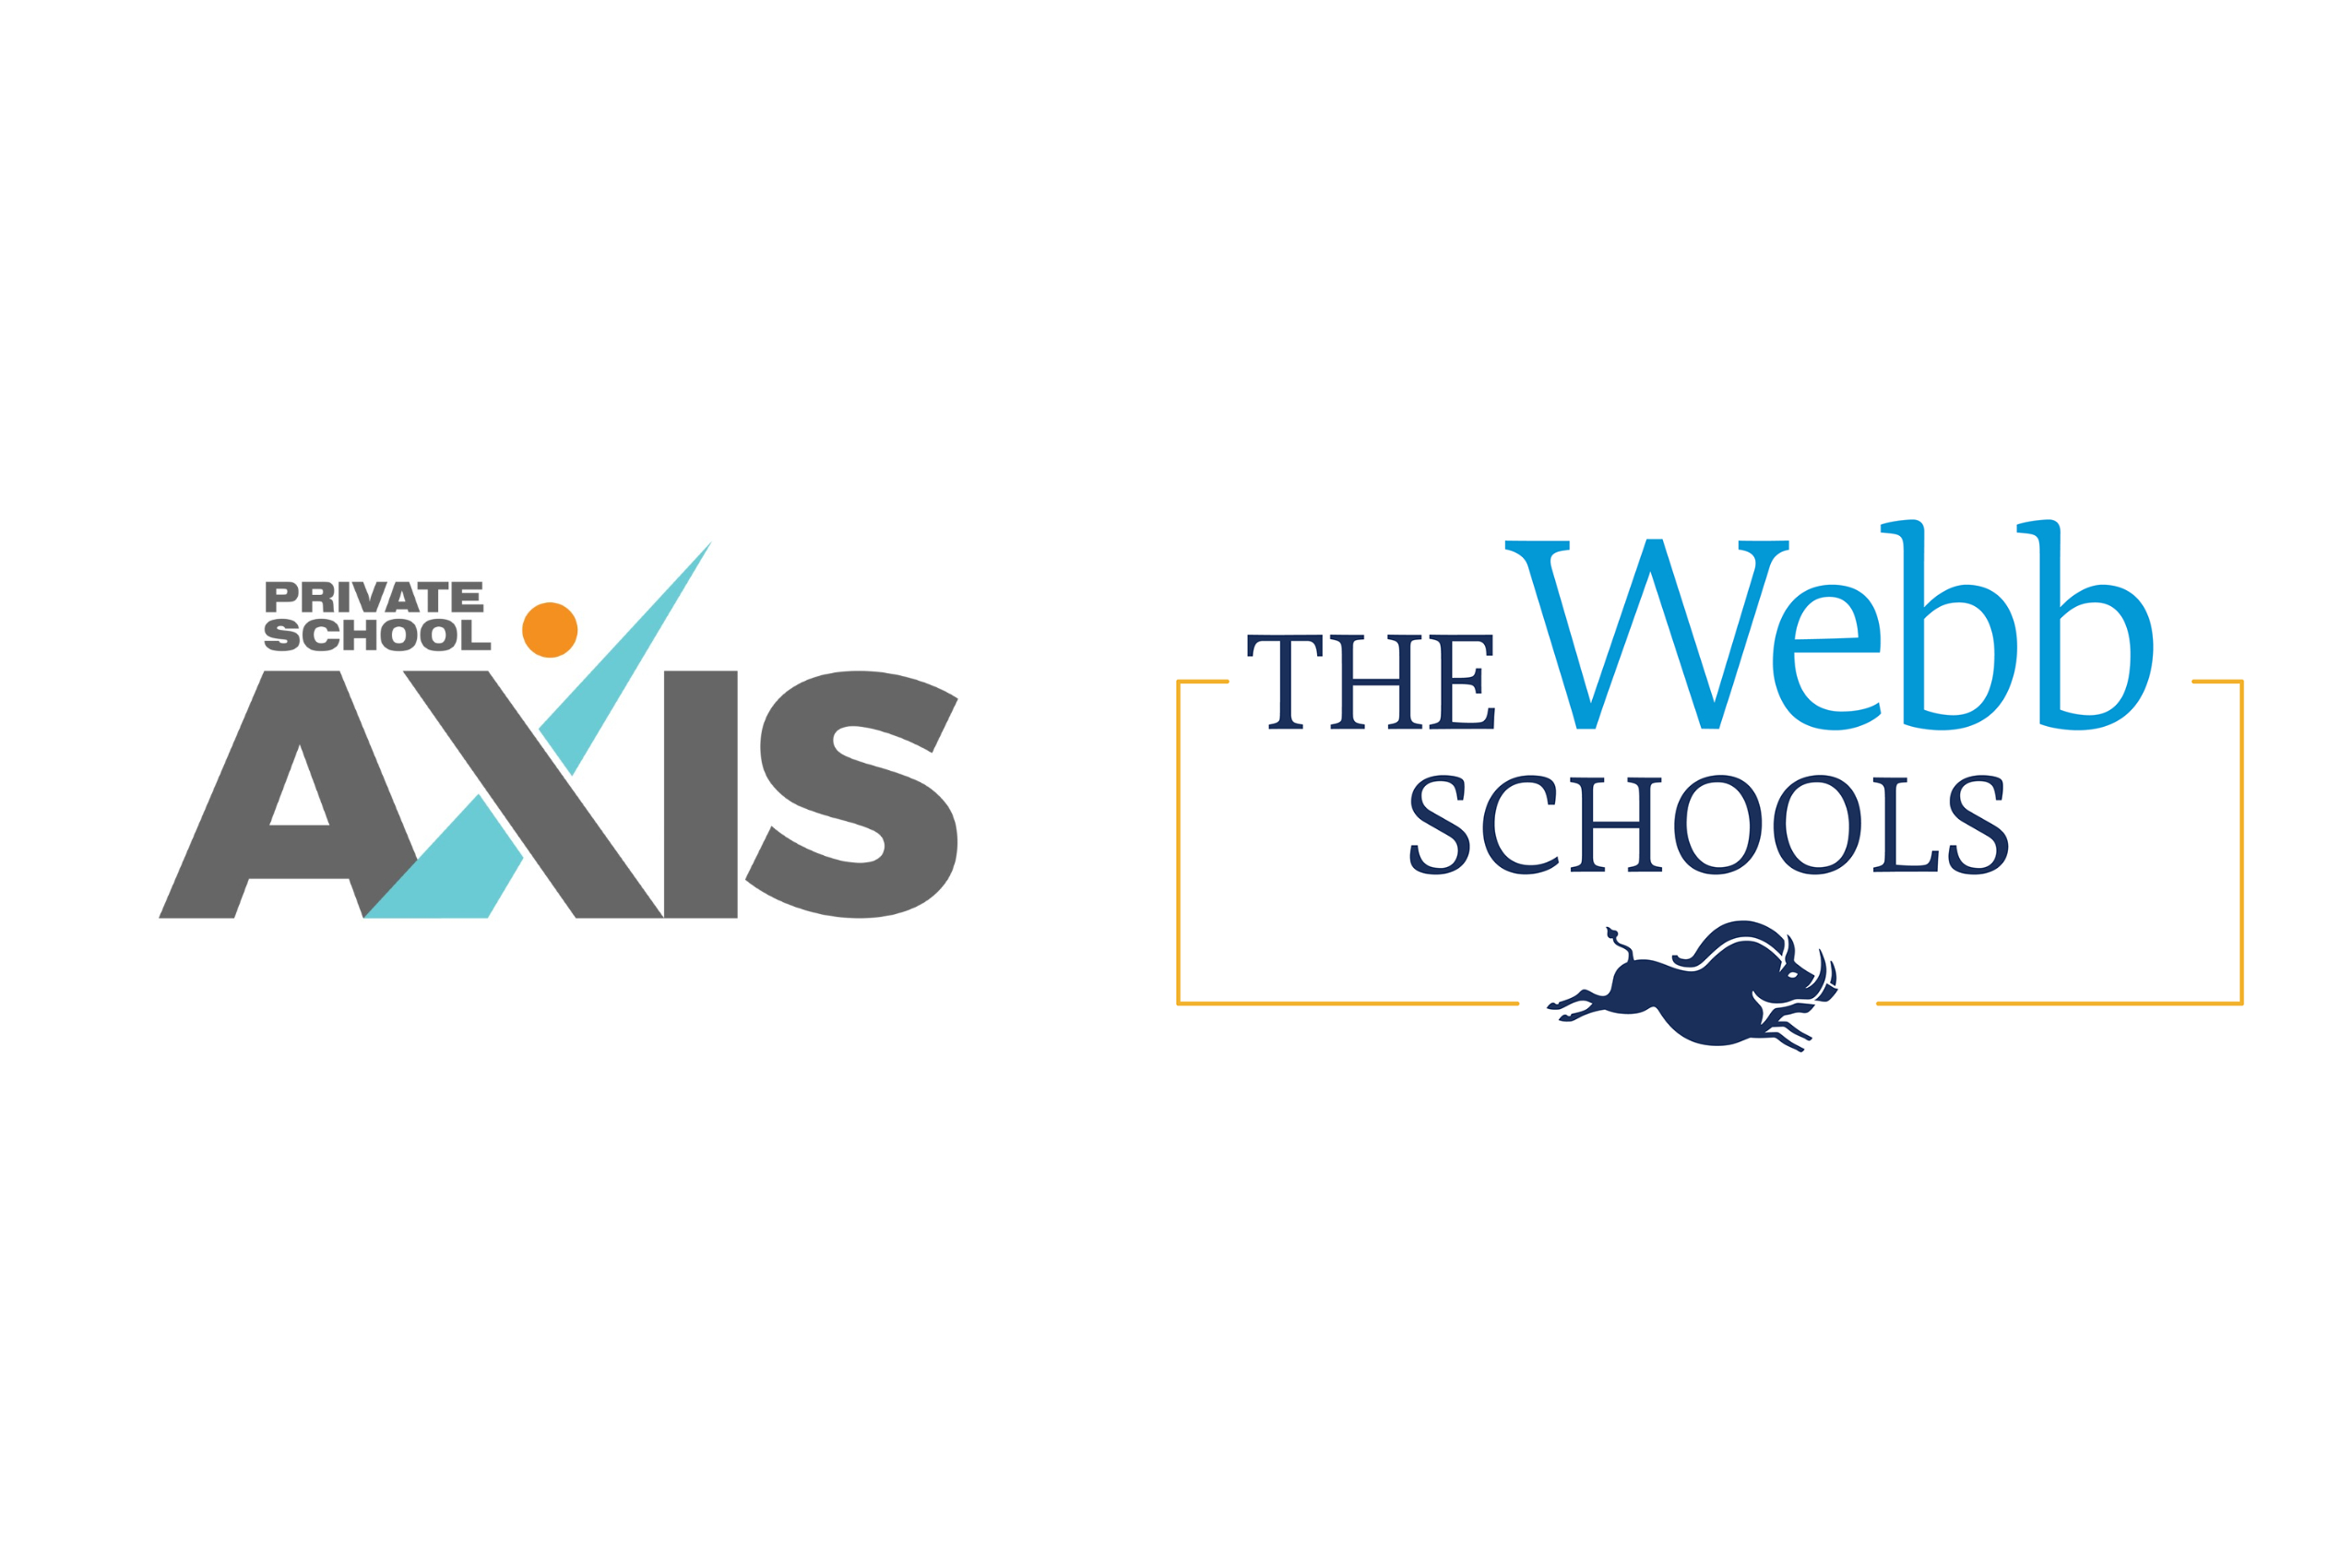 Private School Axis Partnership